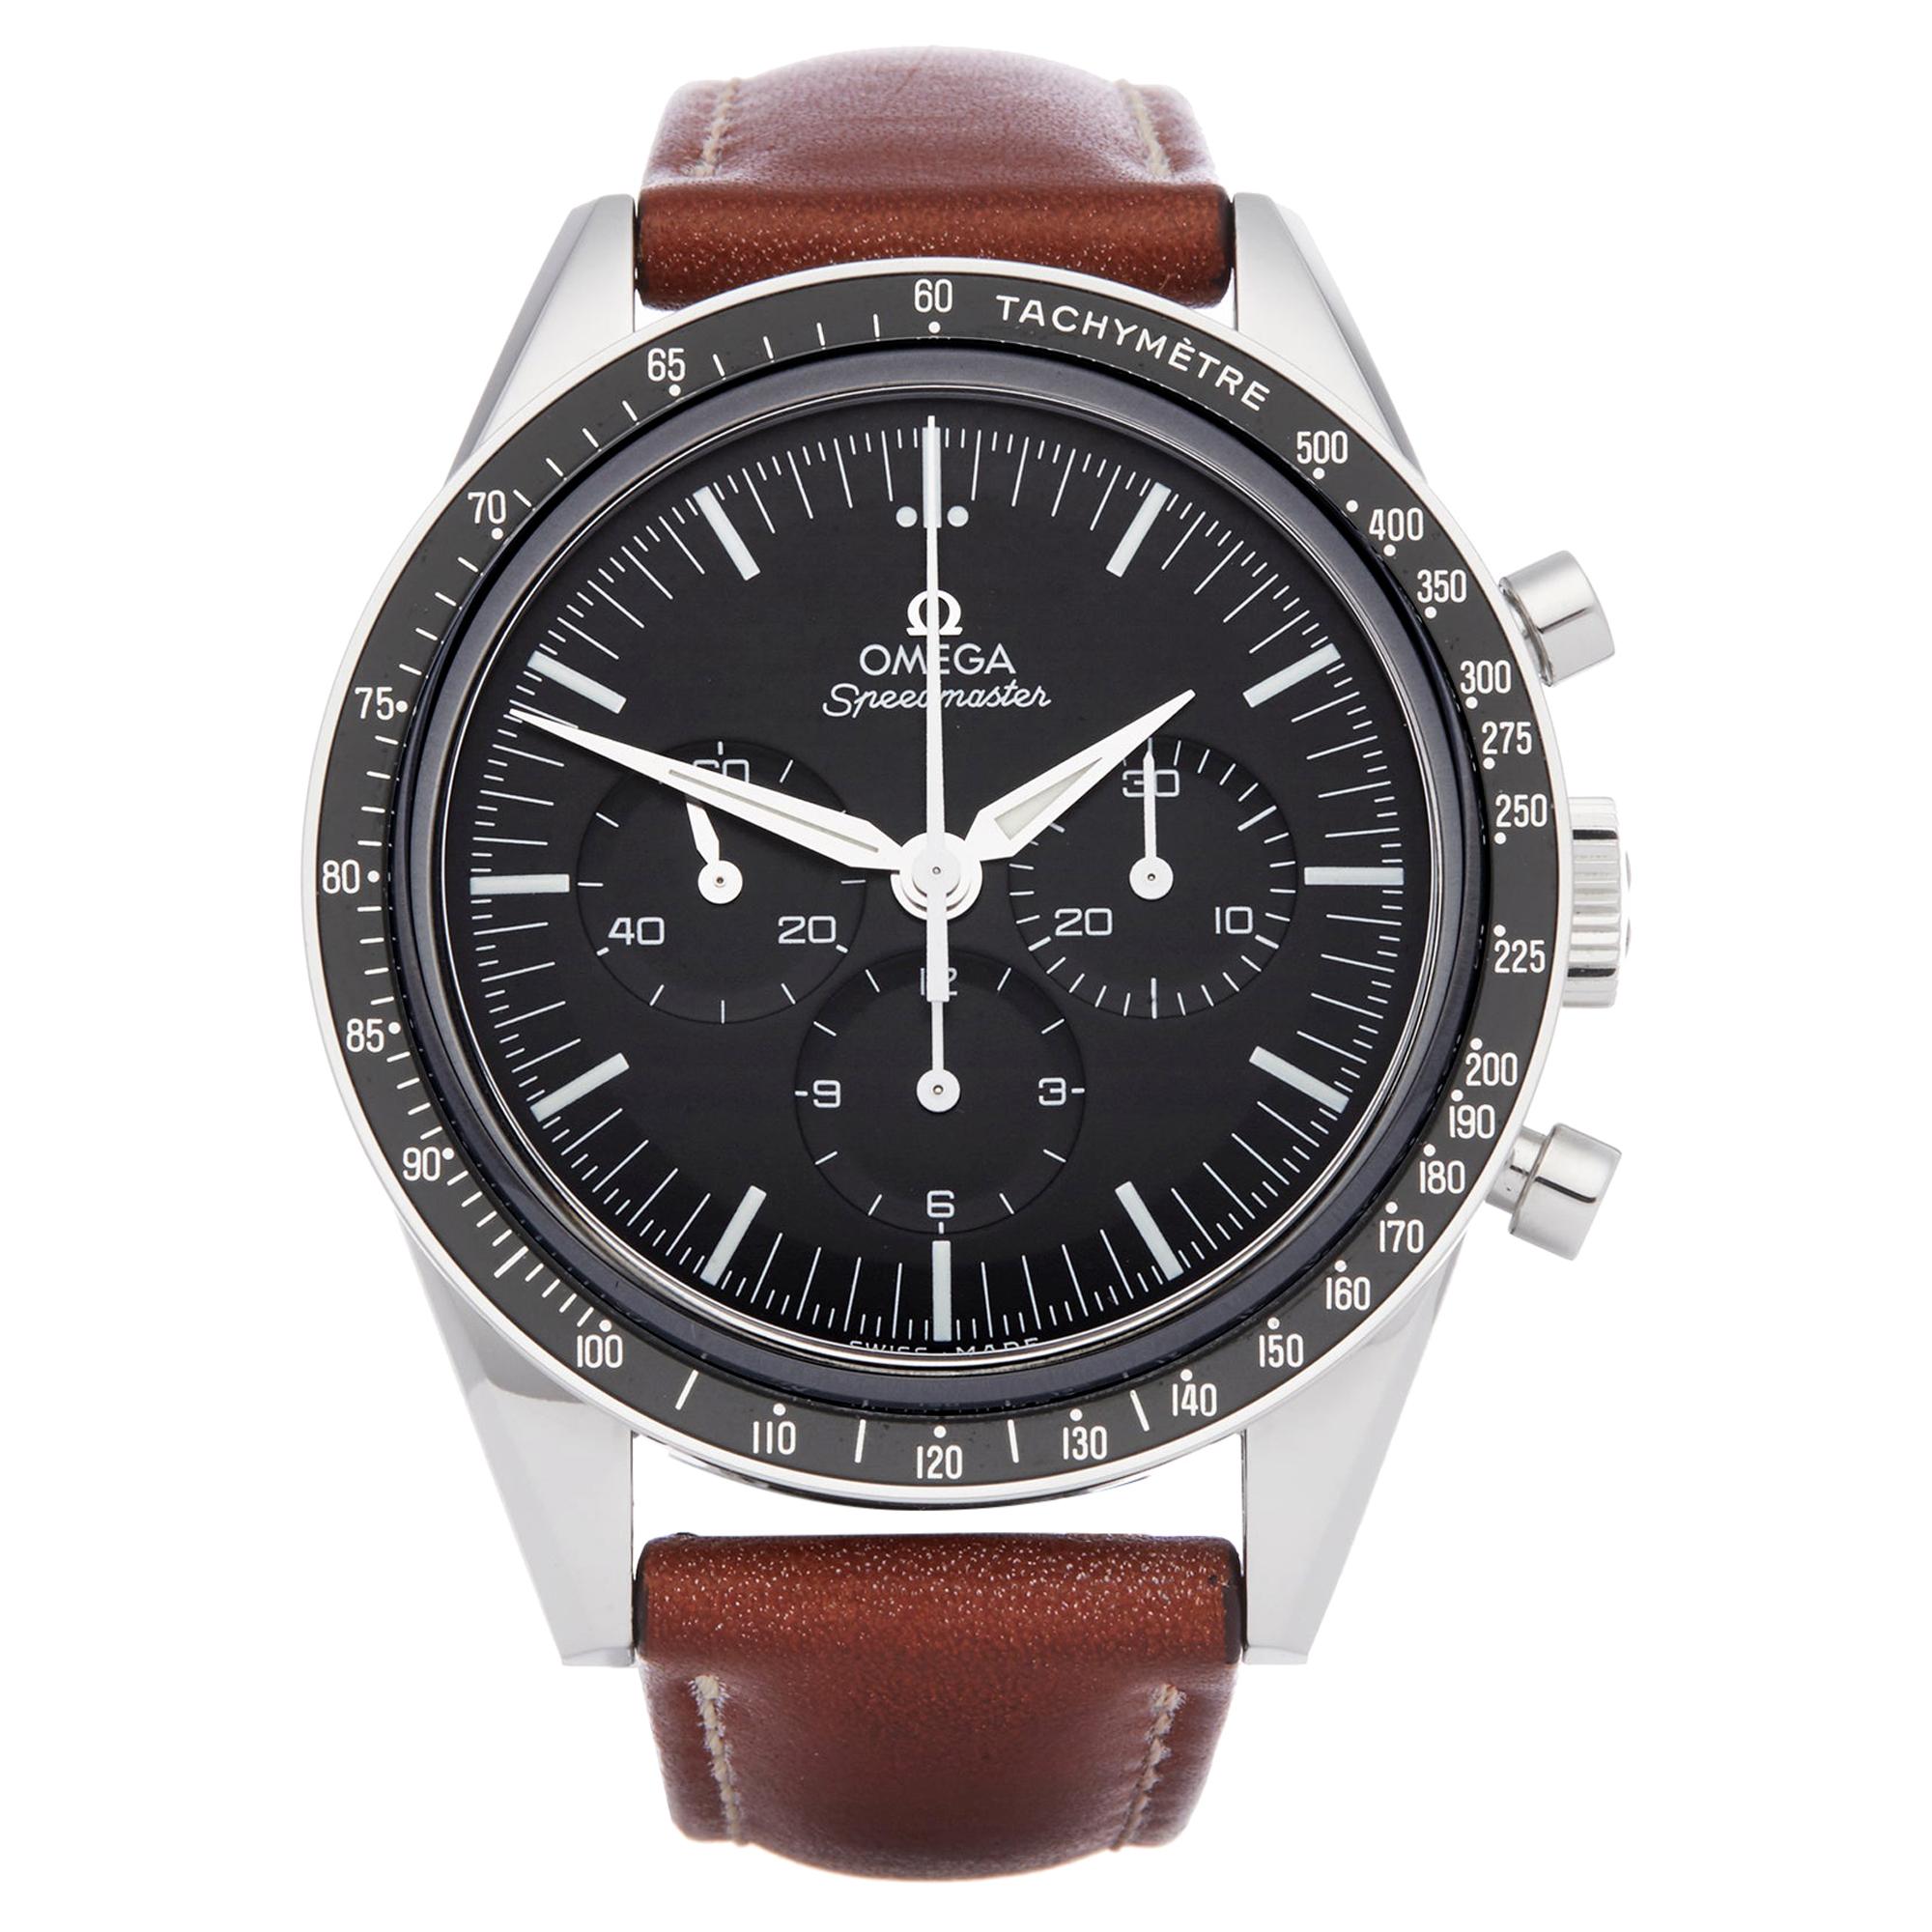 Omega Speedmaster No.6327 Chronograph Moonwatch Stainless Steel 311.31.40.30.01